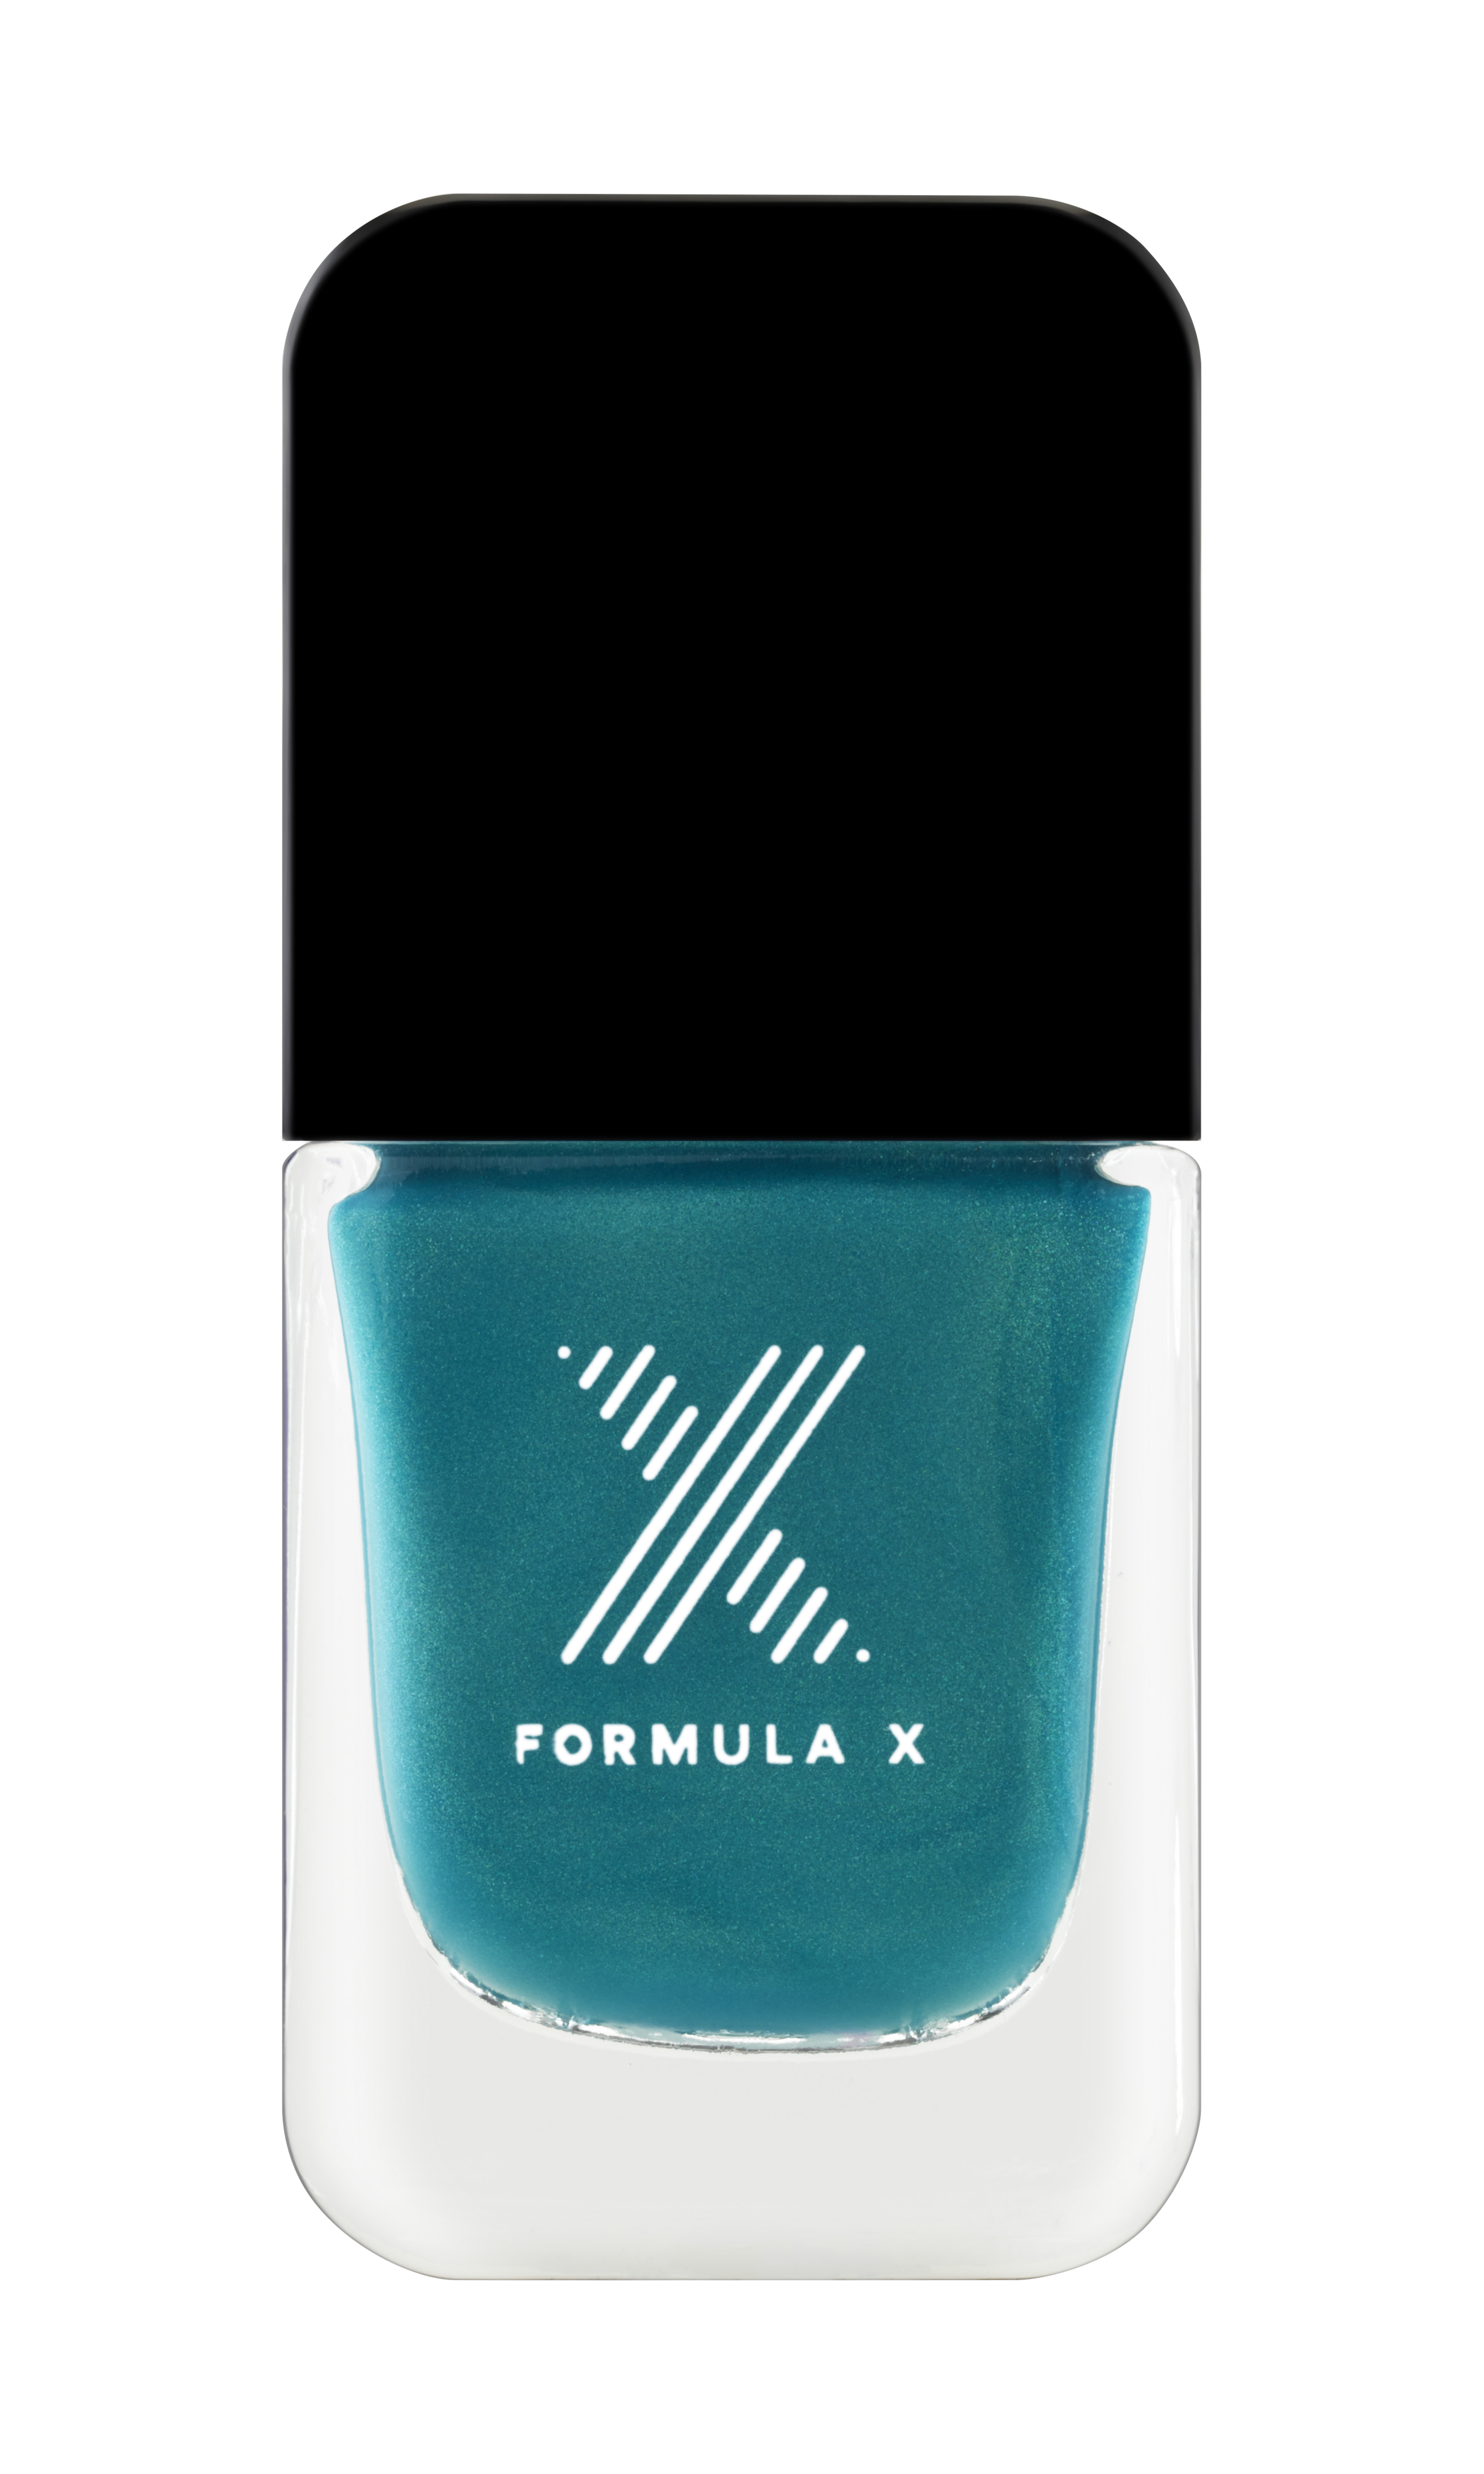 FormulaX - discovery